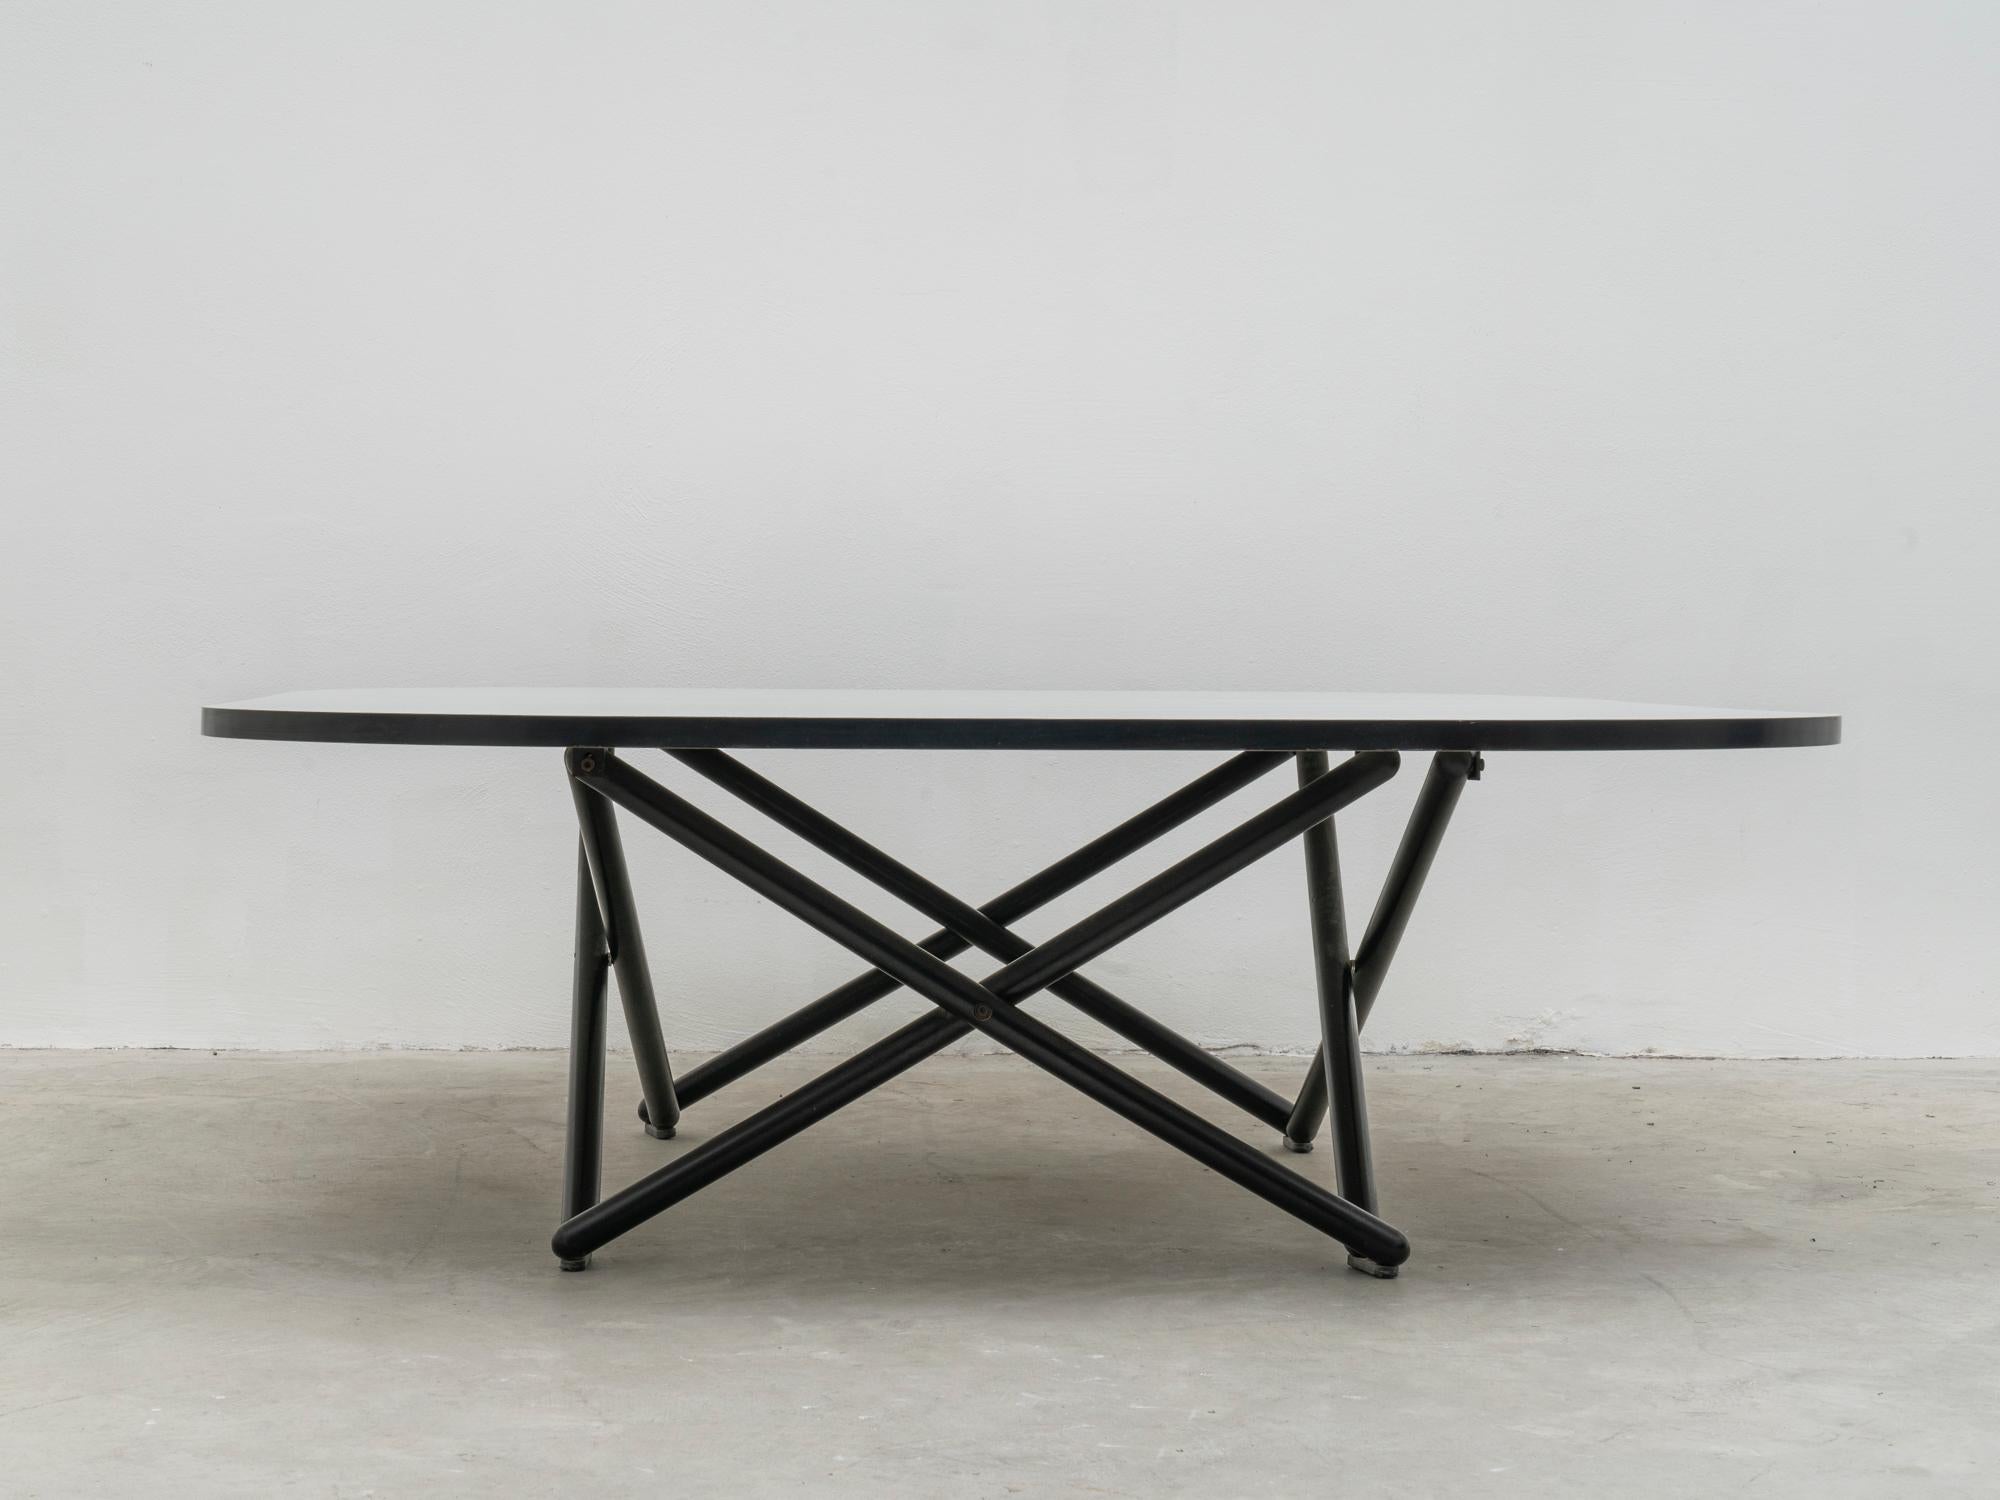 Italian Post-Modern “Broomstick” Coffee Table by Vico Magistretti for Alias, 1980s For Sale